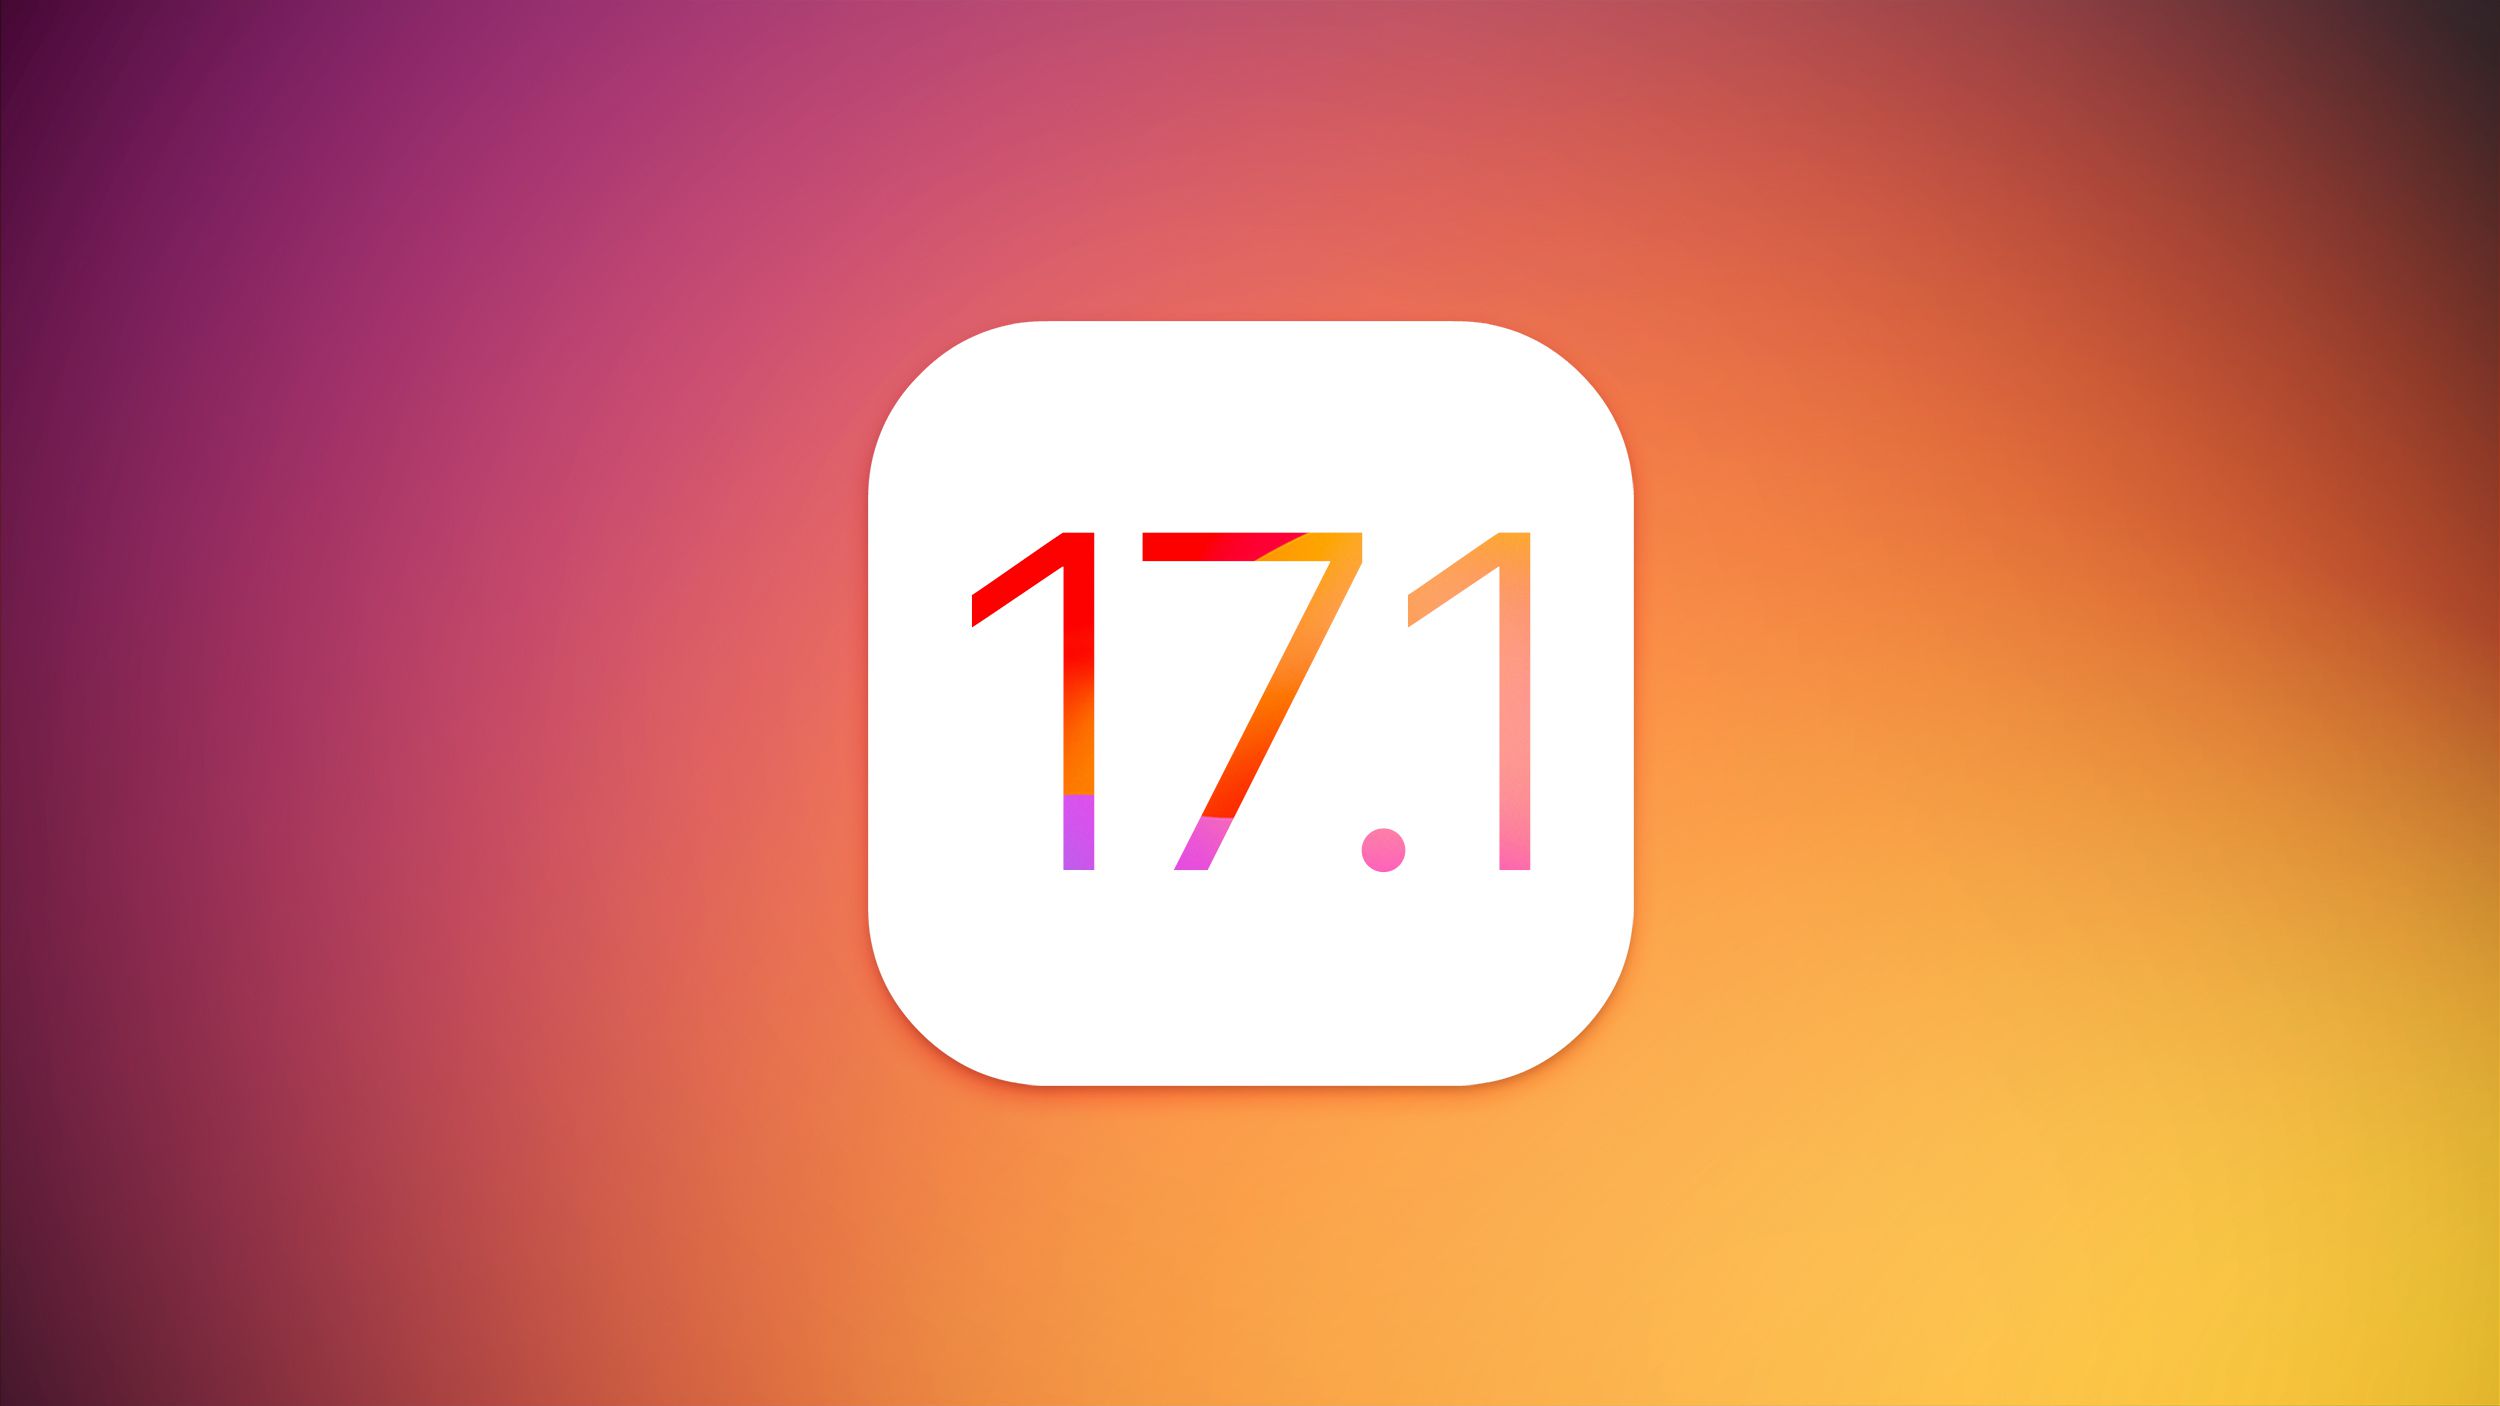 Apple releases iOS 17.1 and iPadOS 17.1 with AirDrop over the Internet, music favorites, and more